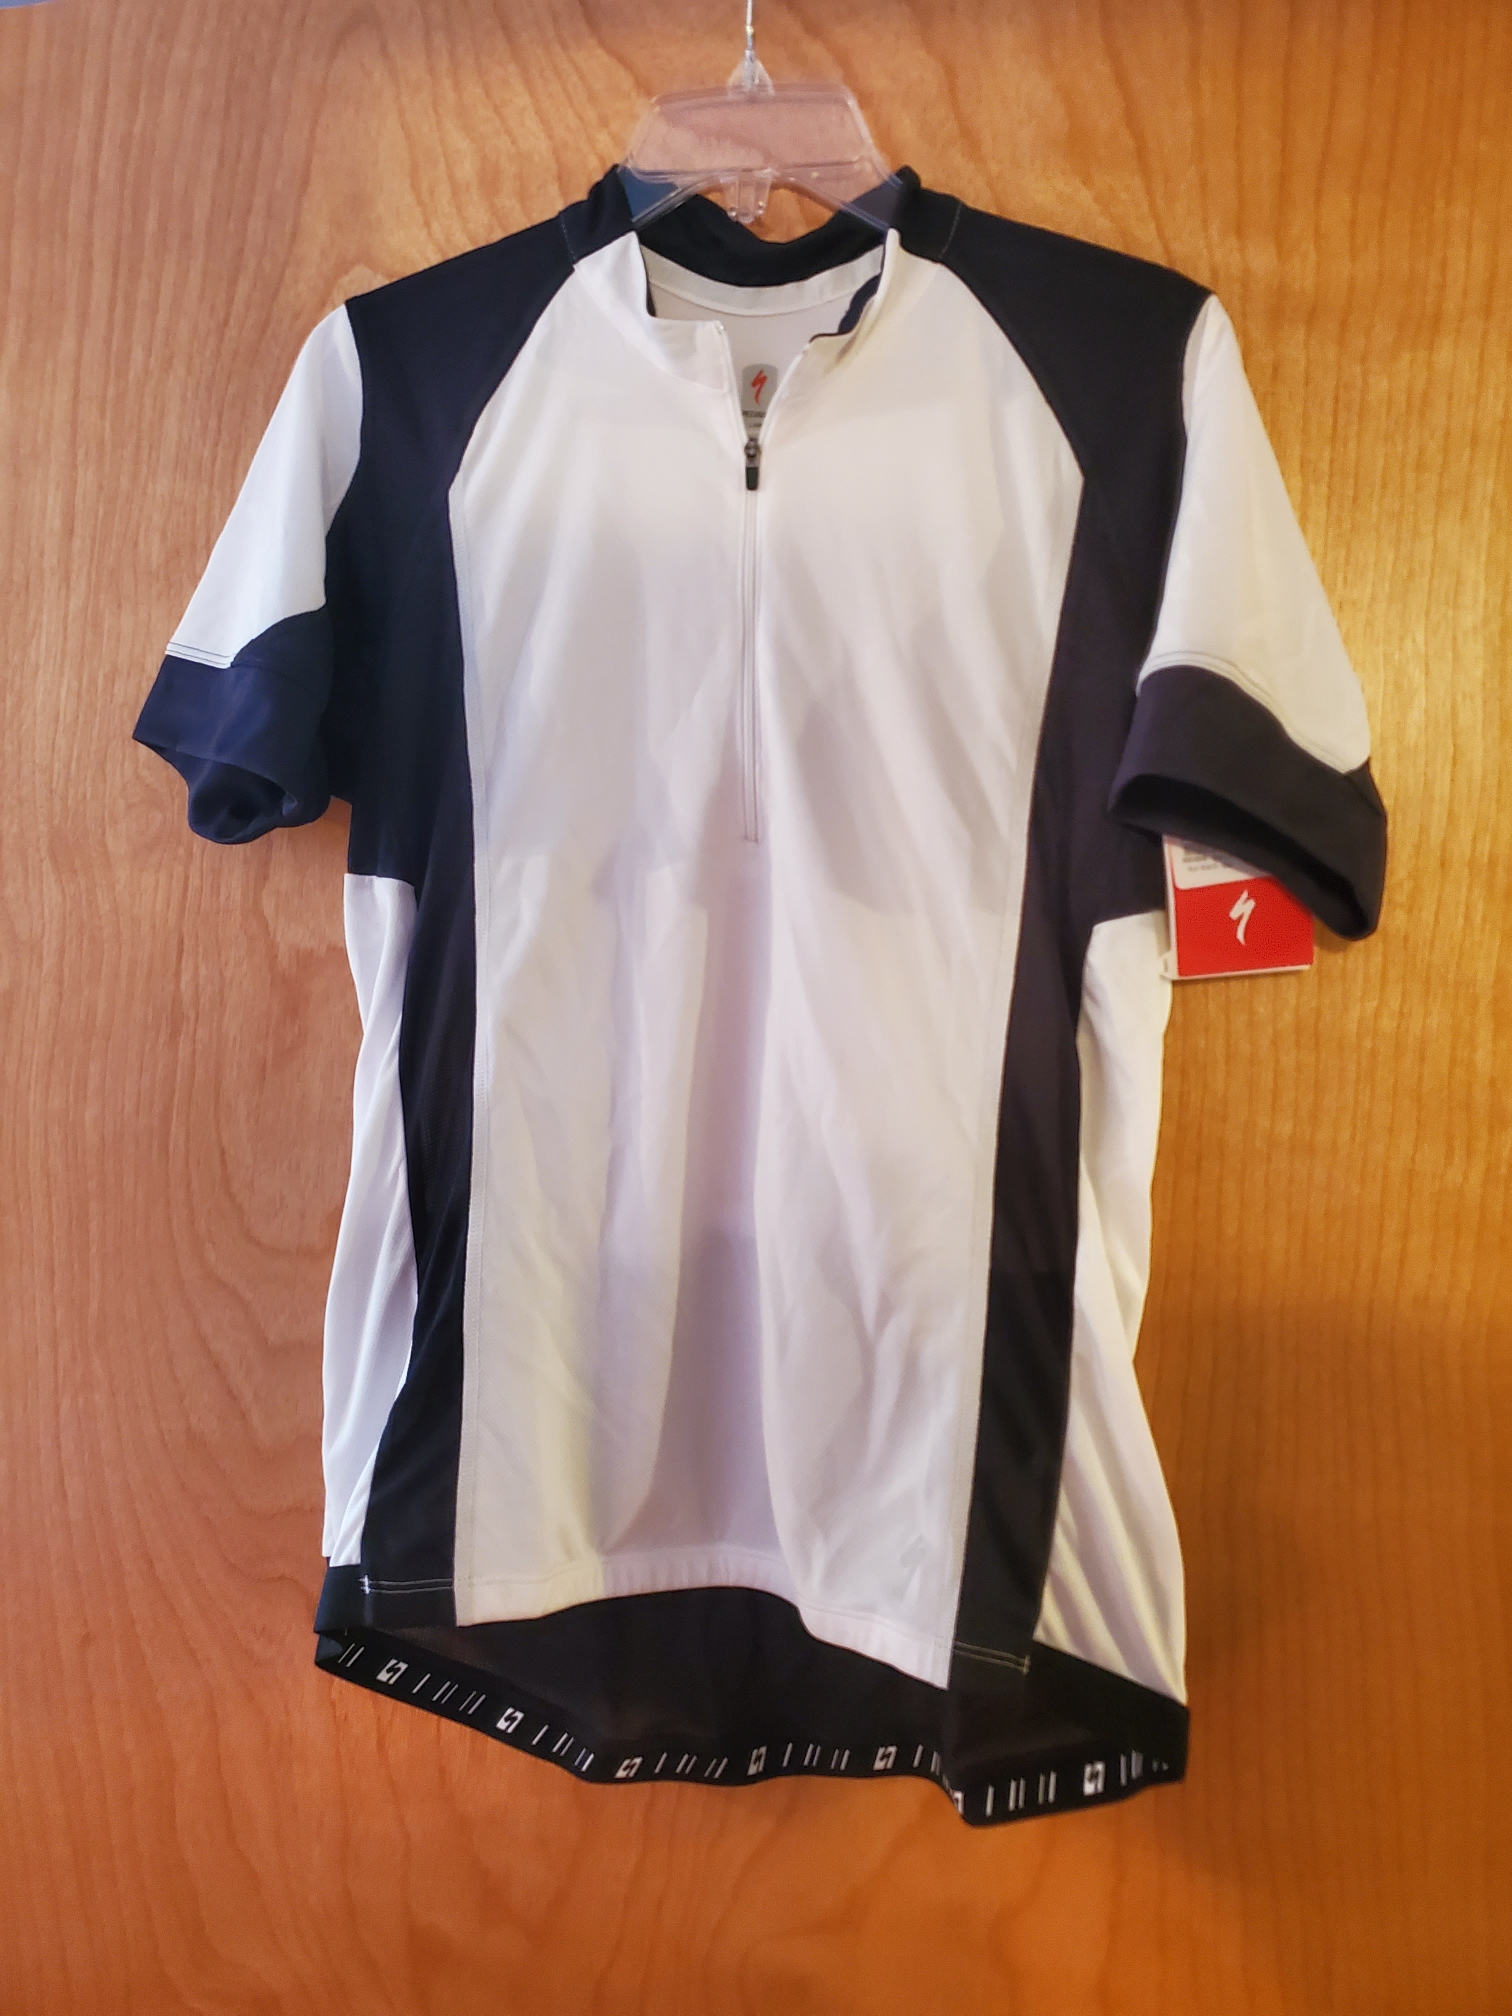 Specialized Allez Jersey, black and white. Large. NWT.